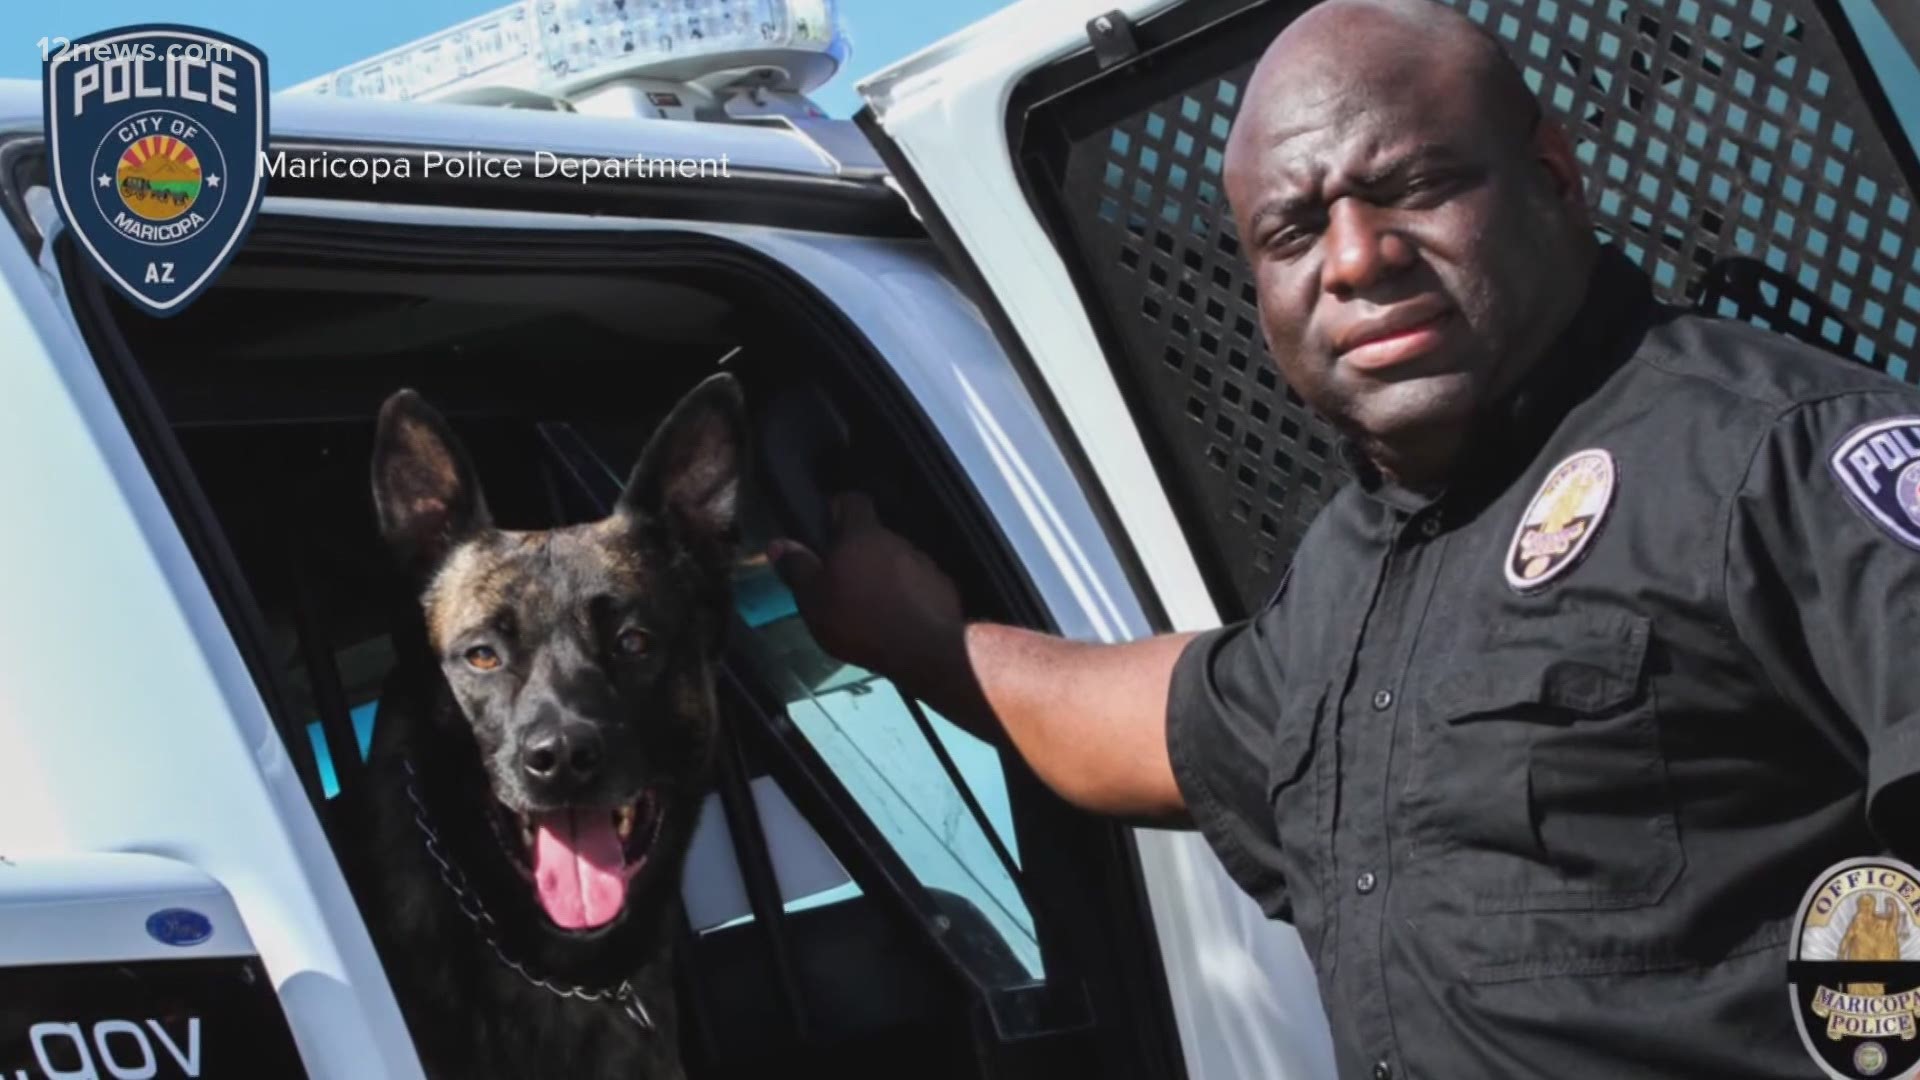 Officer Craig Curry will be suspended for 20 hours without pay after he left his K9, Ike, in his patrol car last June.